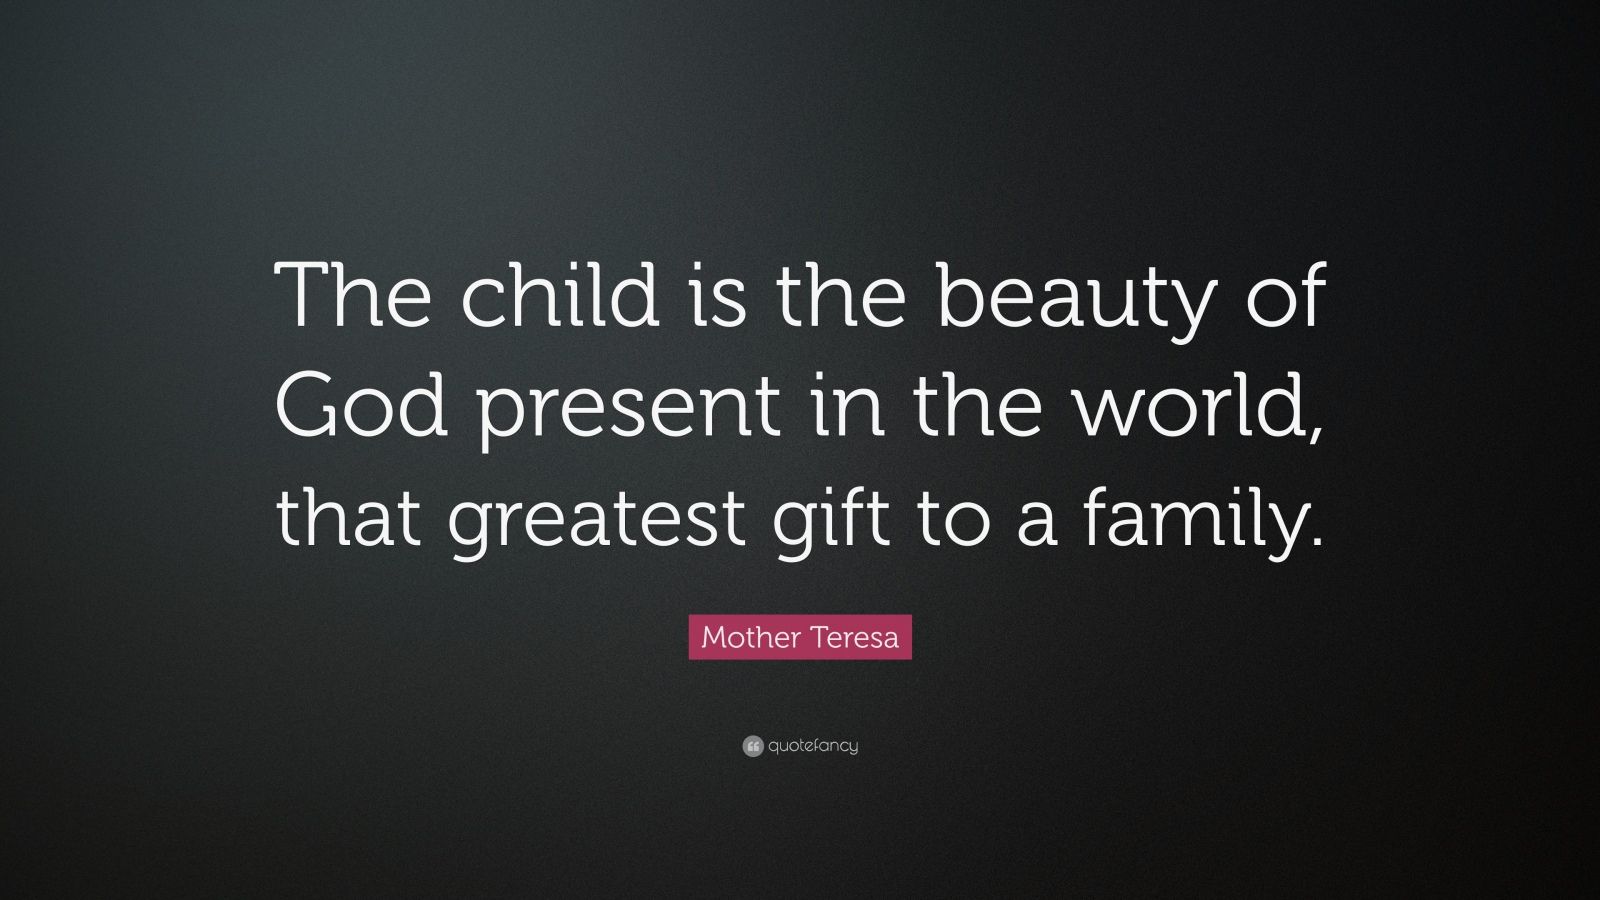 Mother Teresa Quote: “The child is the beauty of God present in the